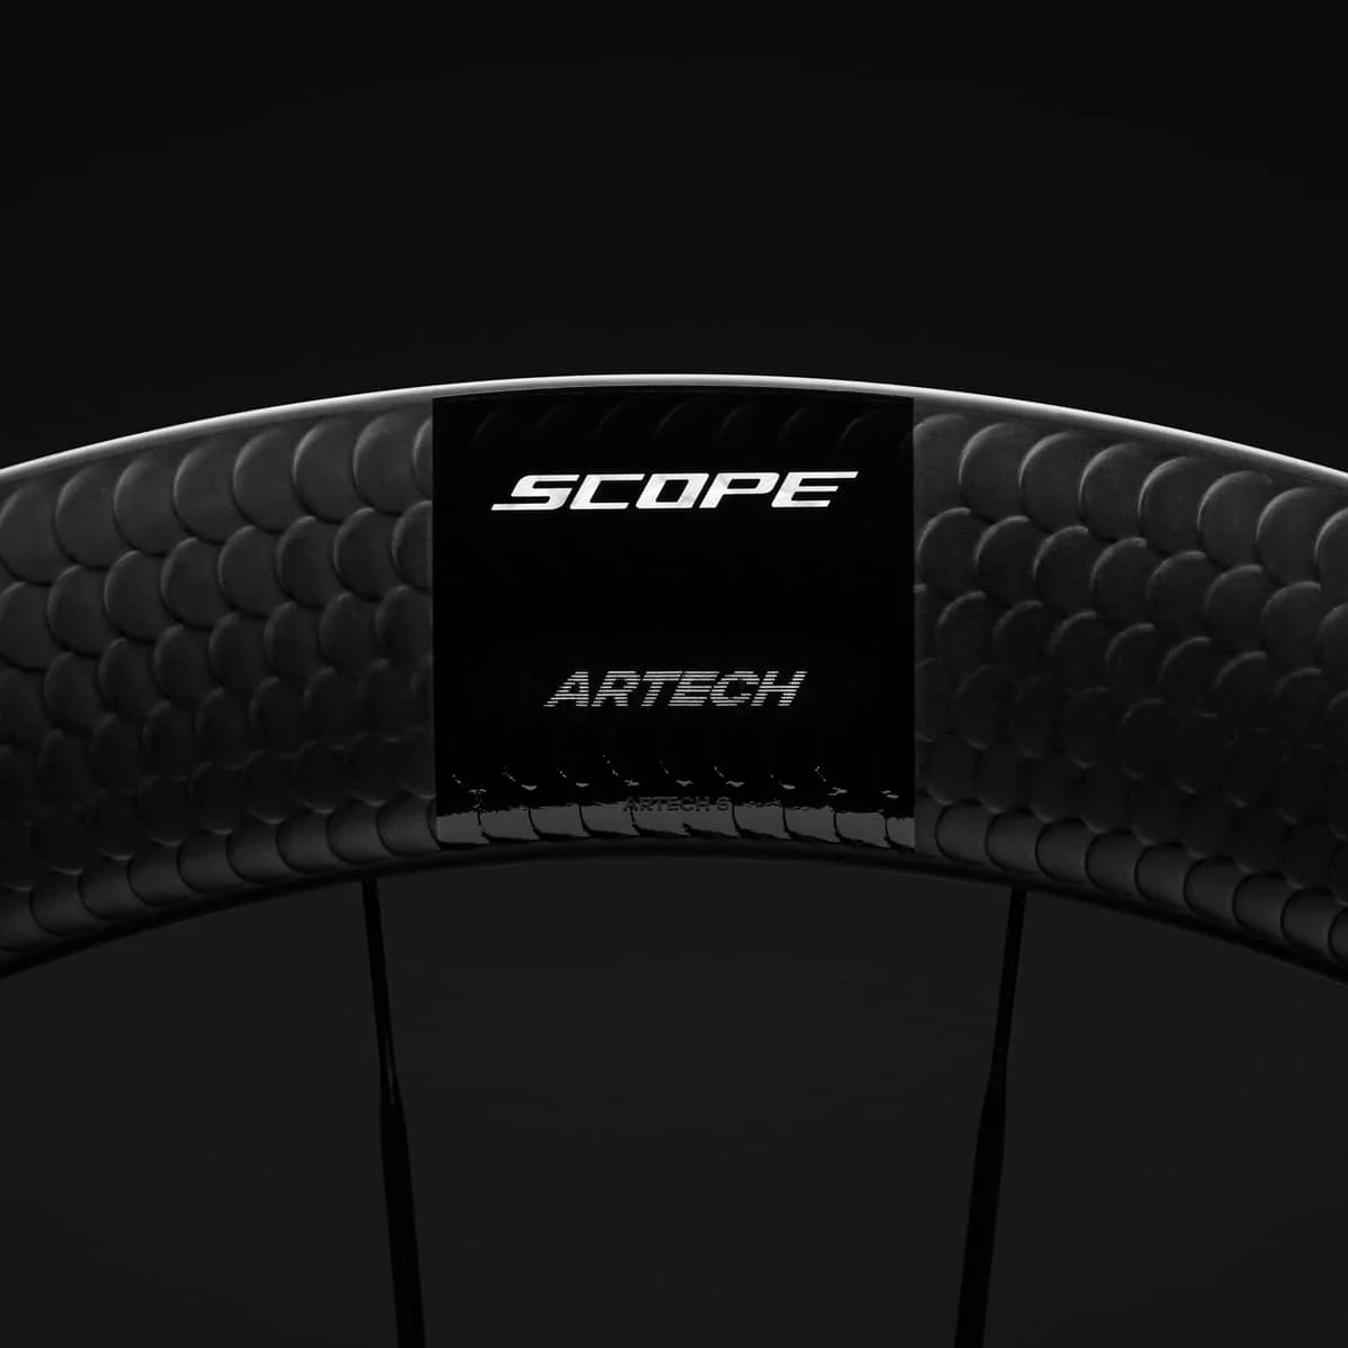 The Artech wheels feature Scope's patent-pending Aeroscales technology